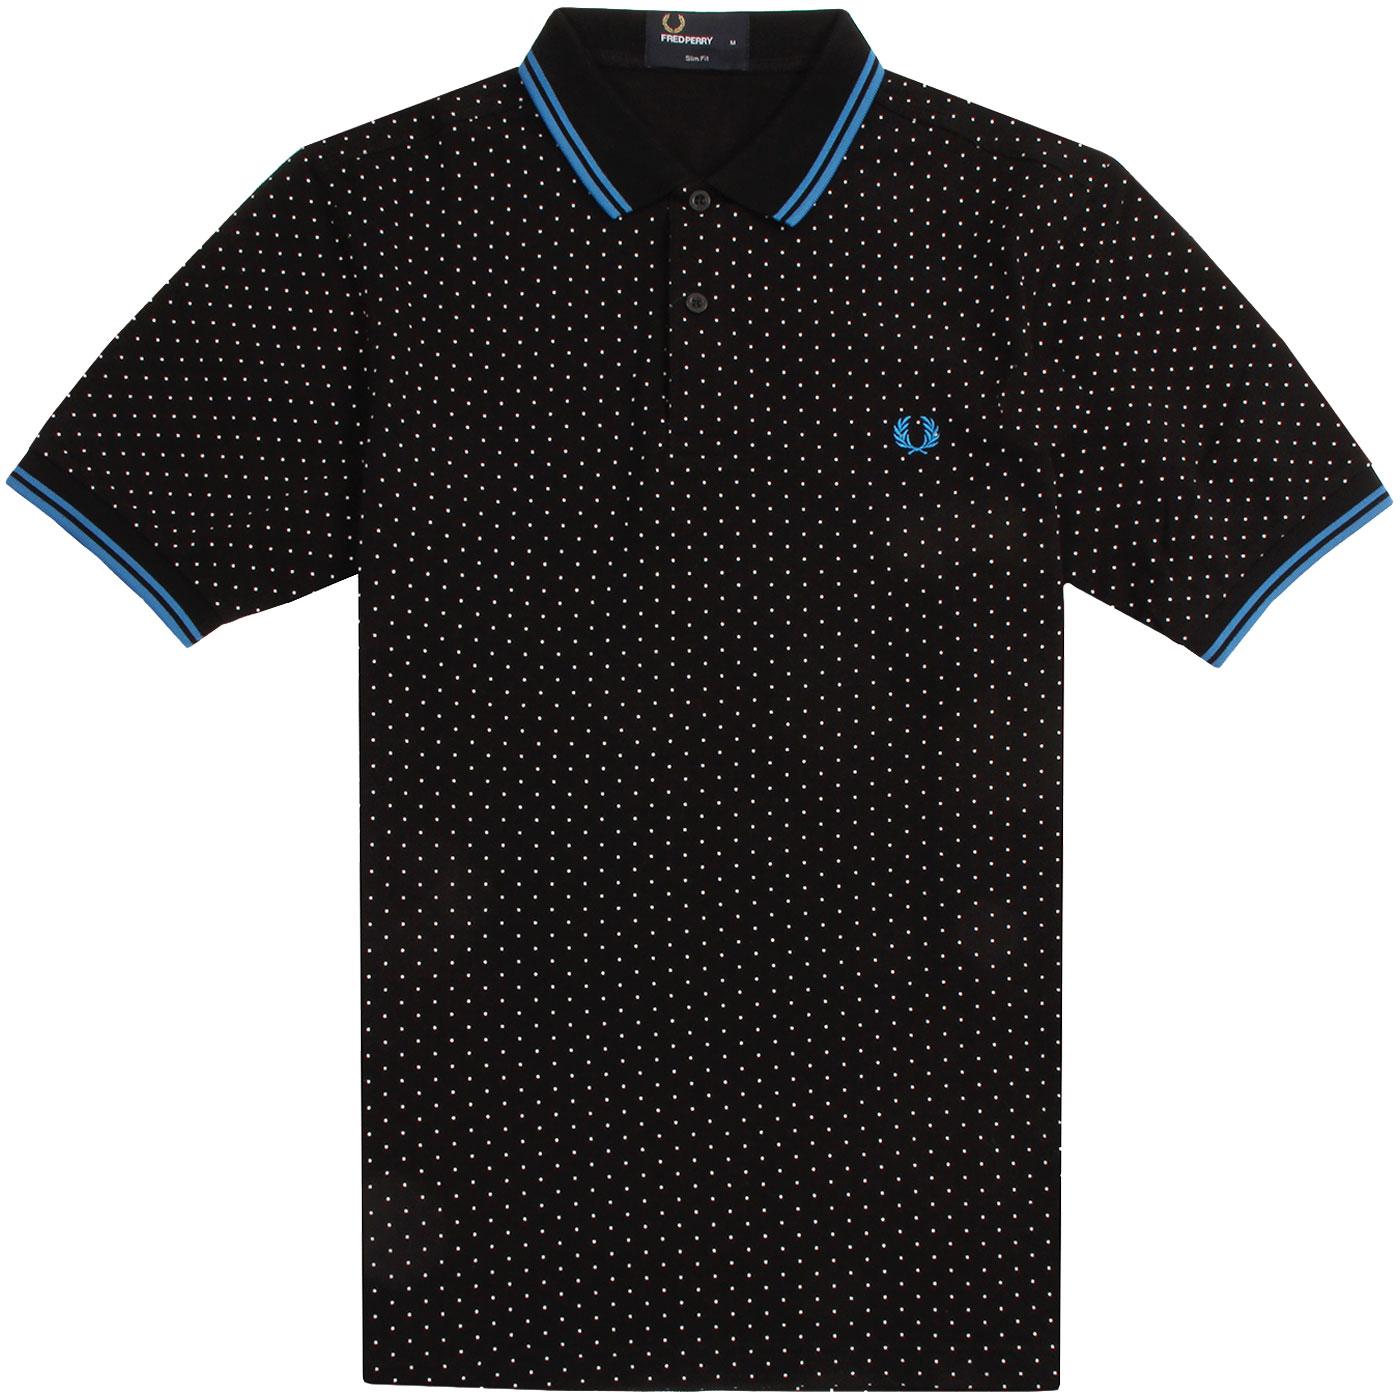 FRED PERRY Mod Polka Dot Tipped Pique Polo Shirt 